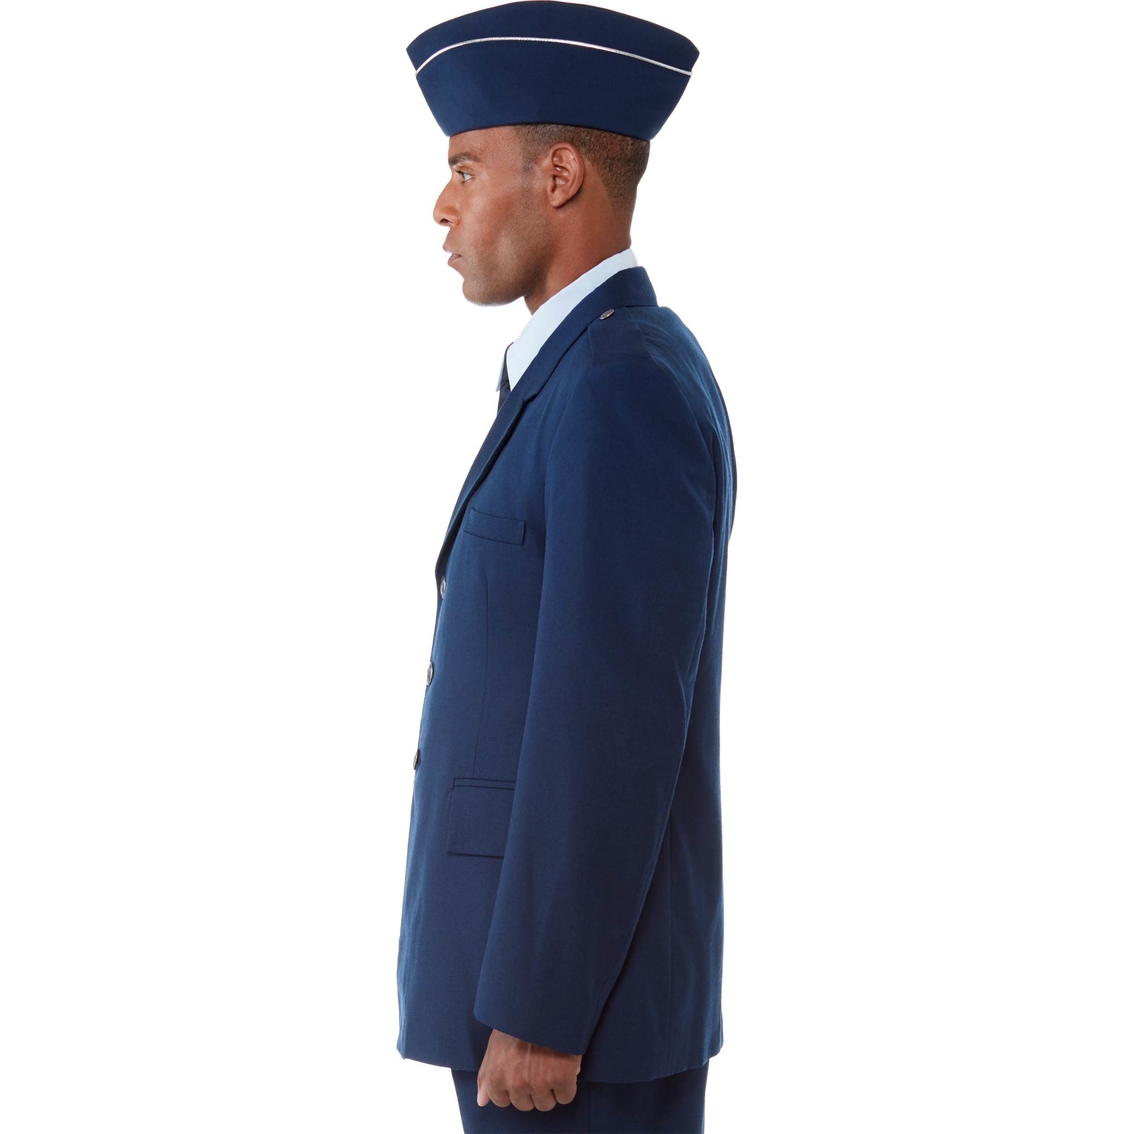 Air Force Officer Service Dress Coat - Image 3 of 4